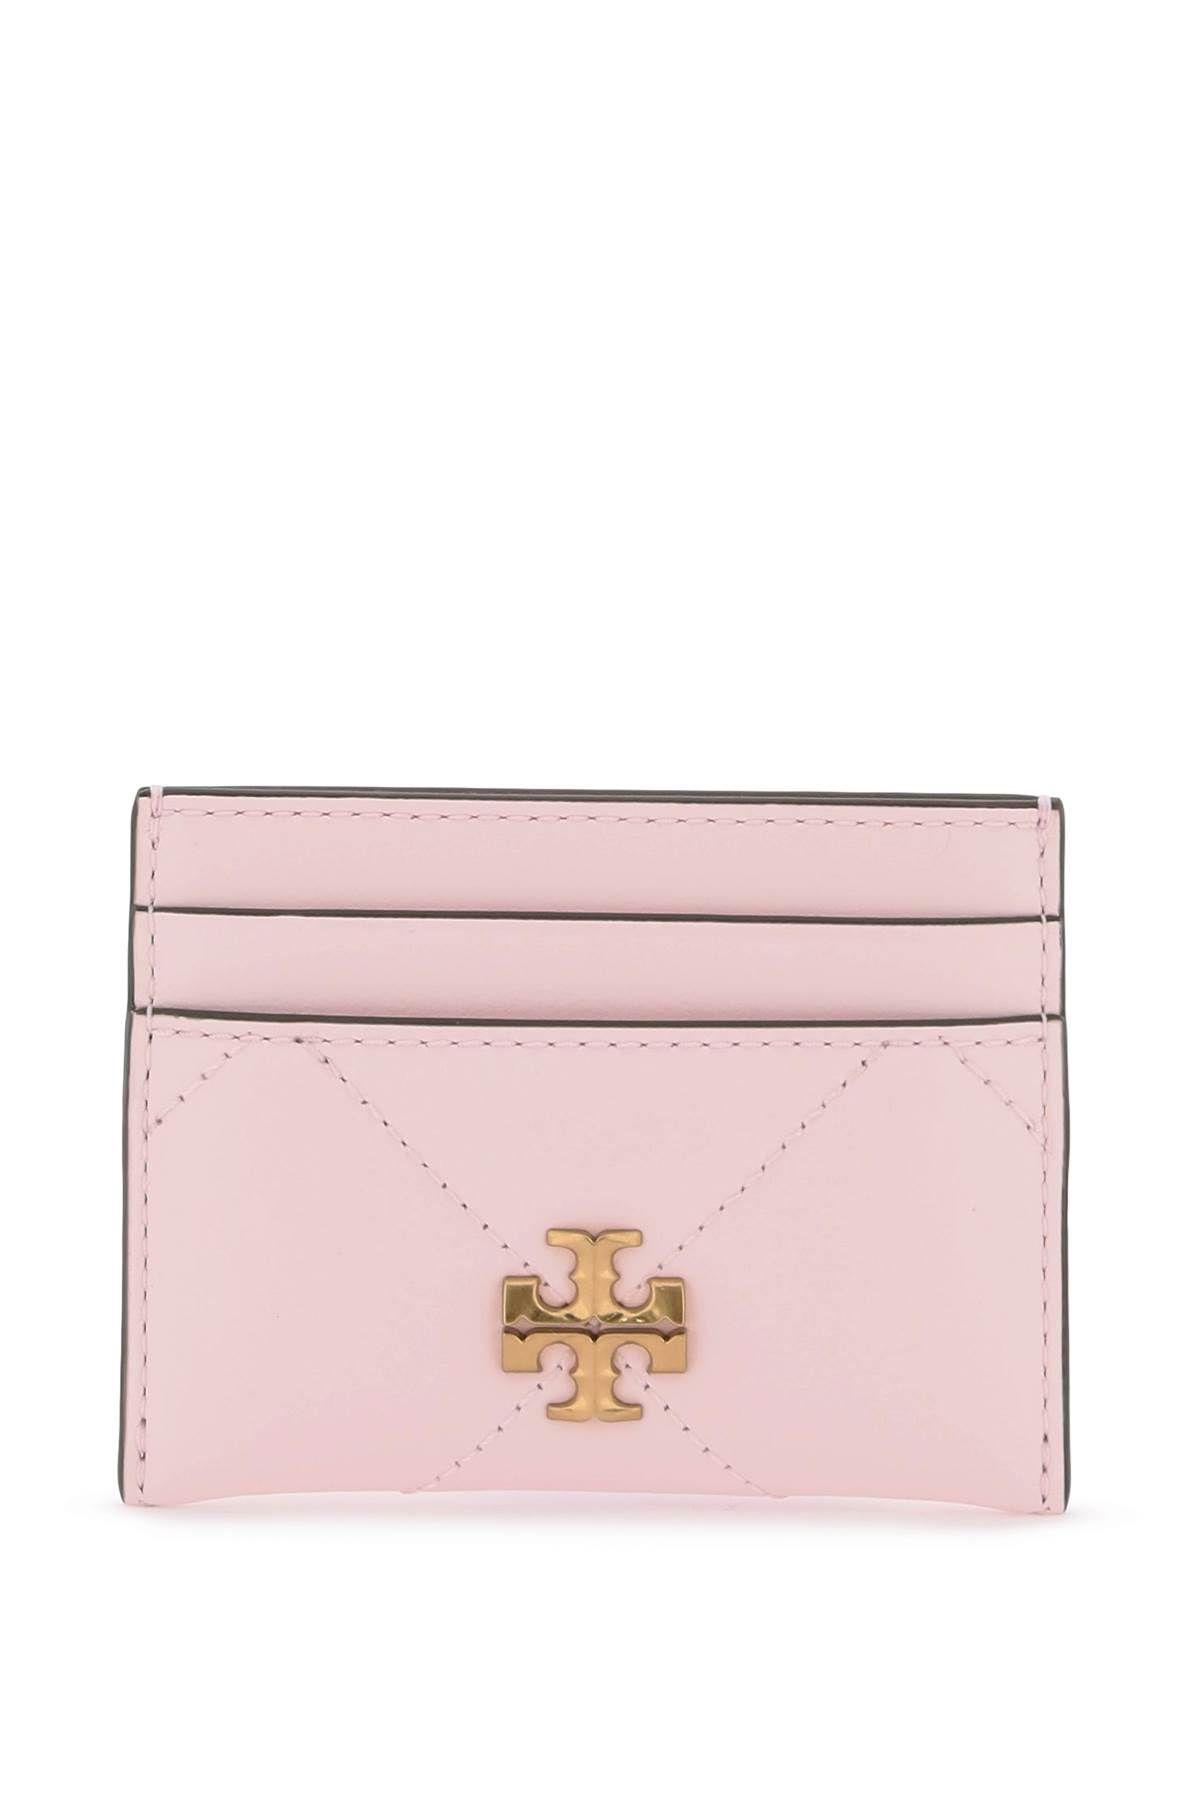 TORY BURCH kira card holder with trapezoid